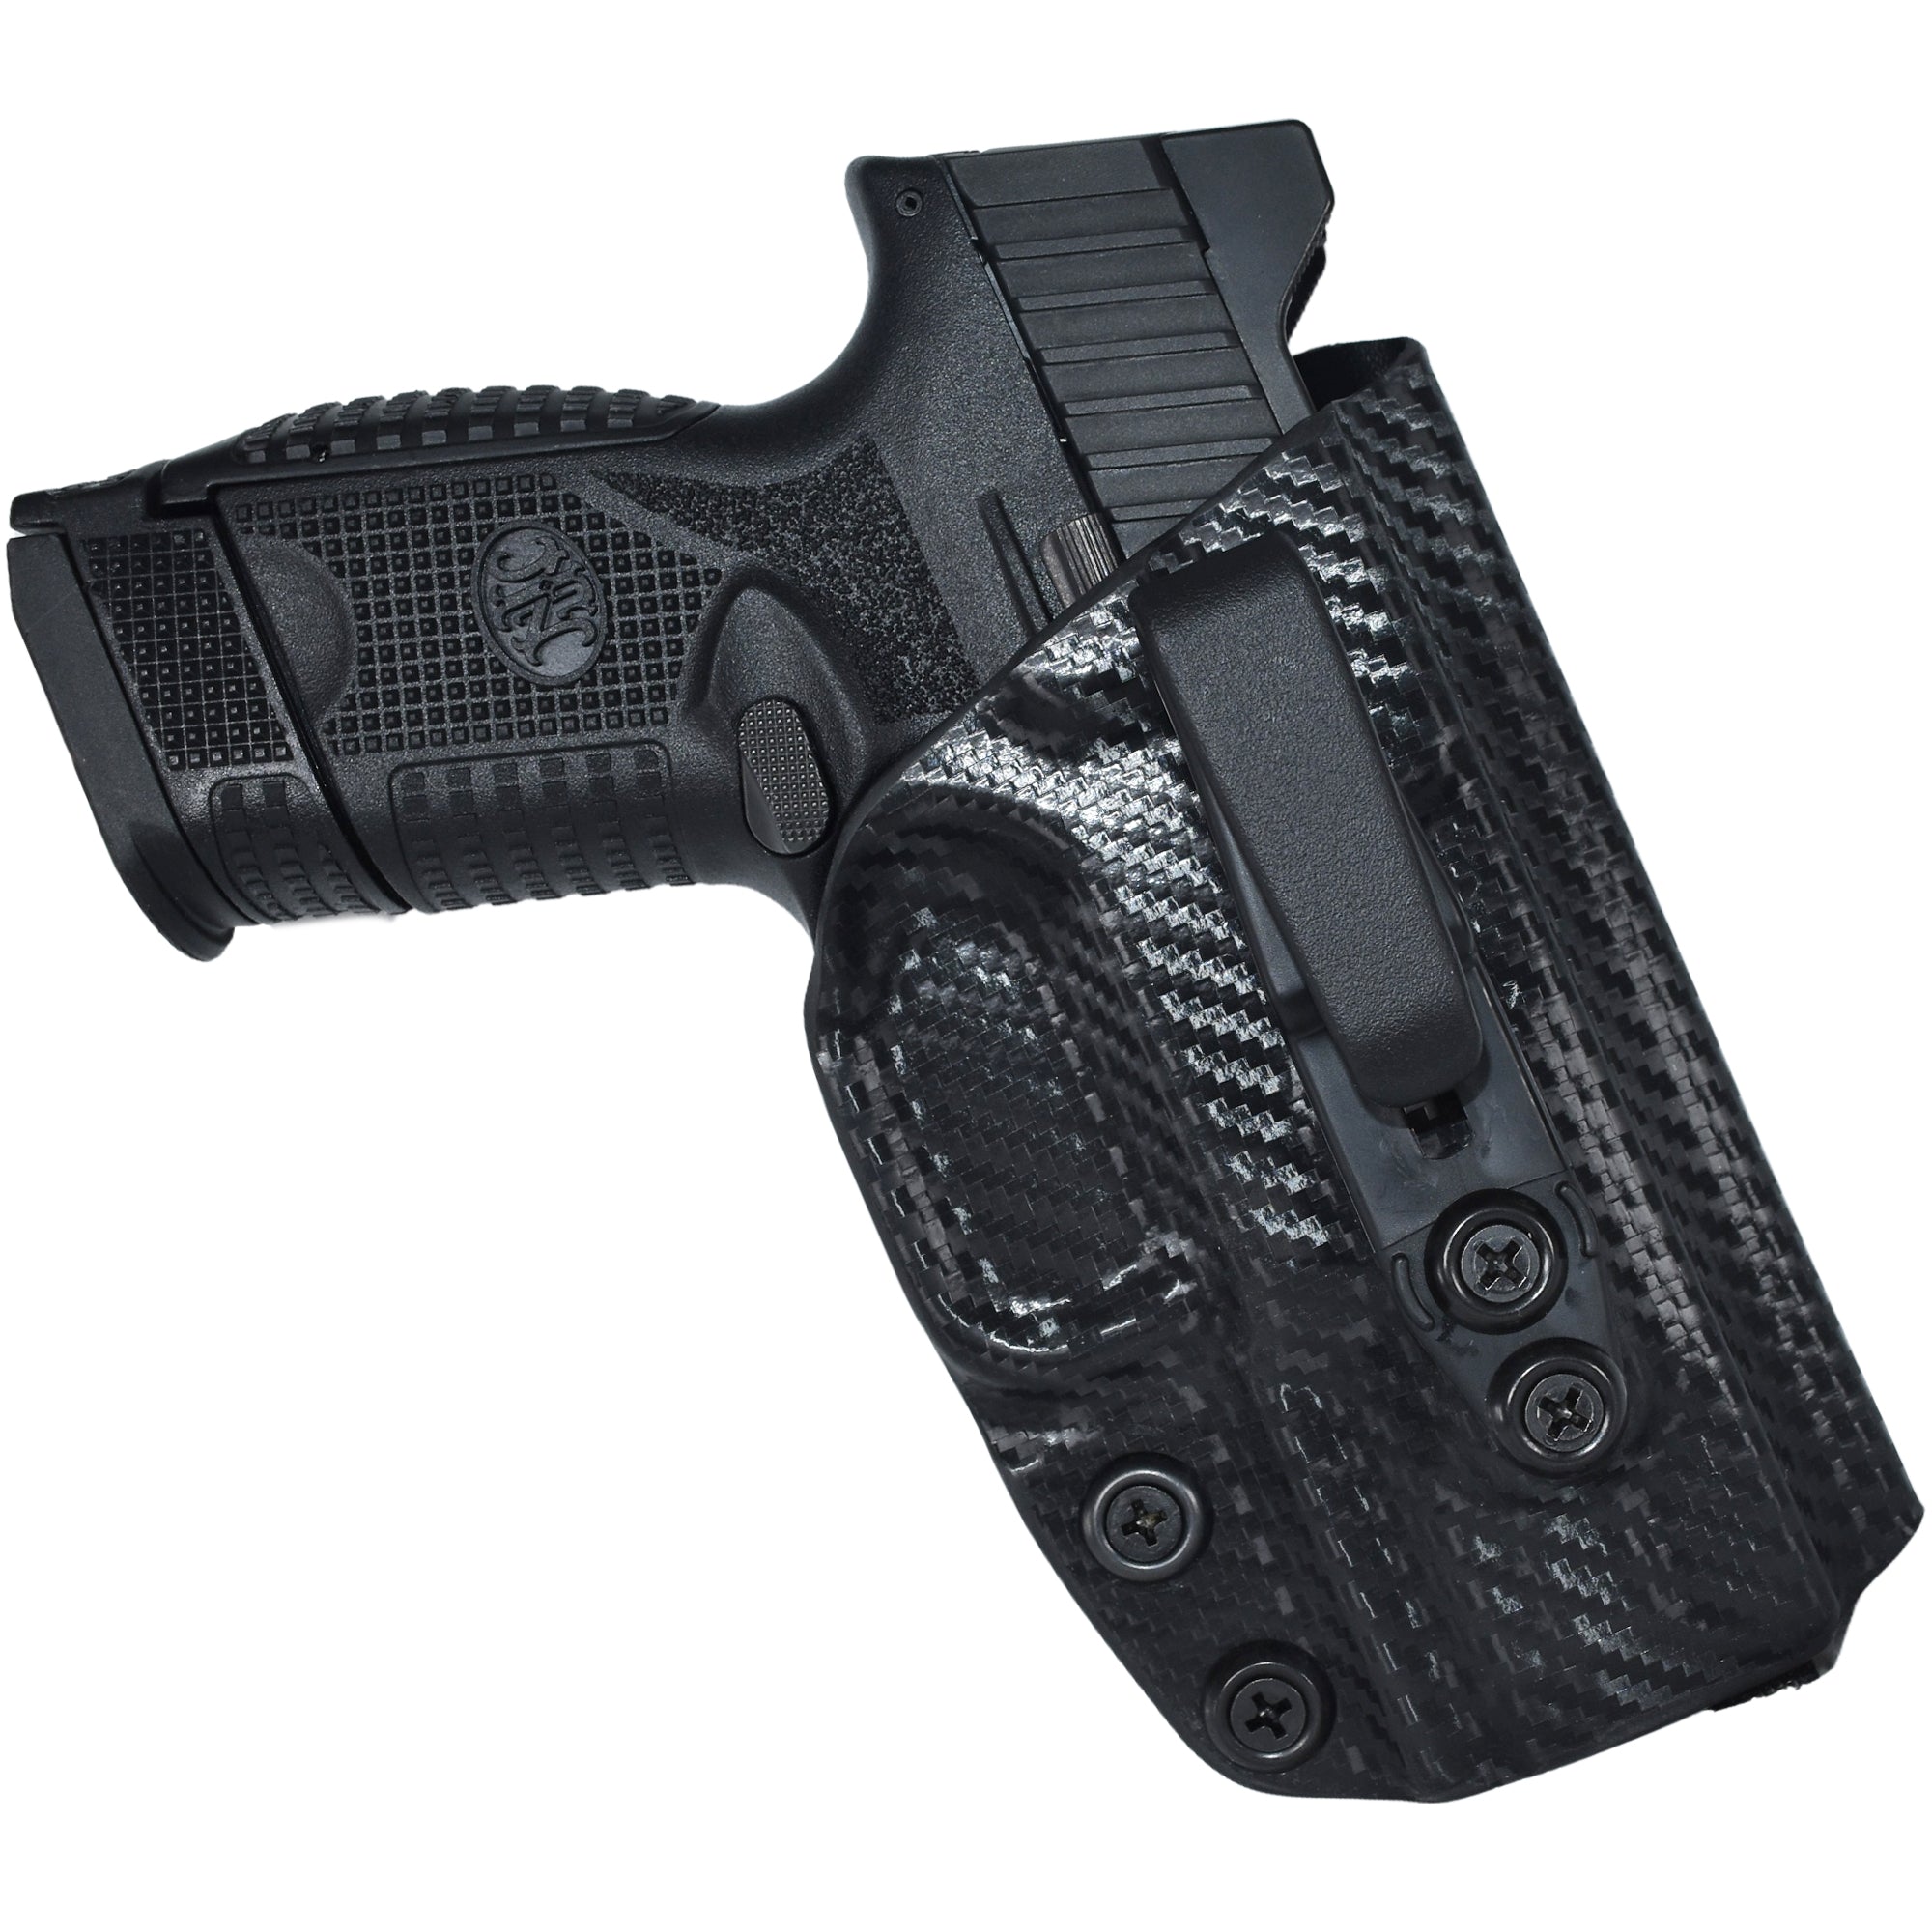 FNH 509 Compact IWB Kydex Full Profile Holster